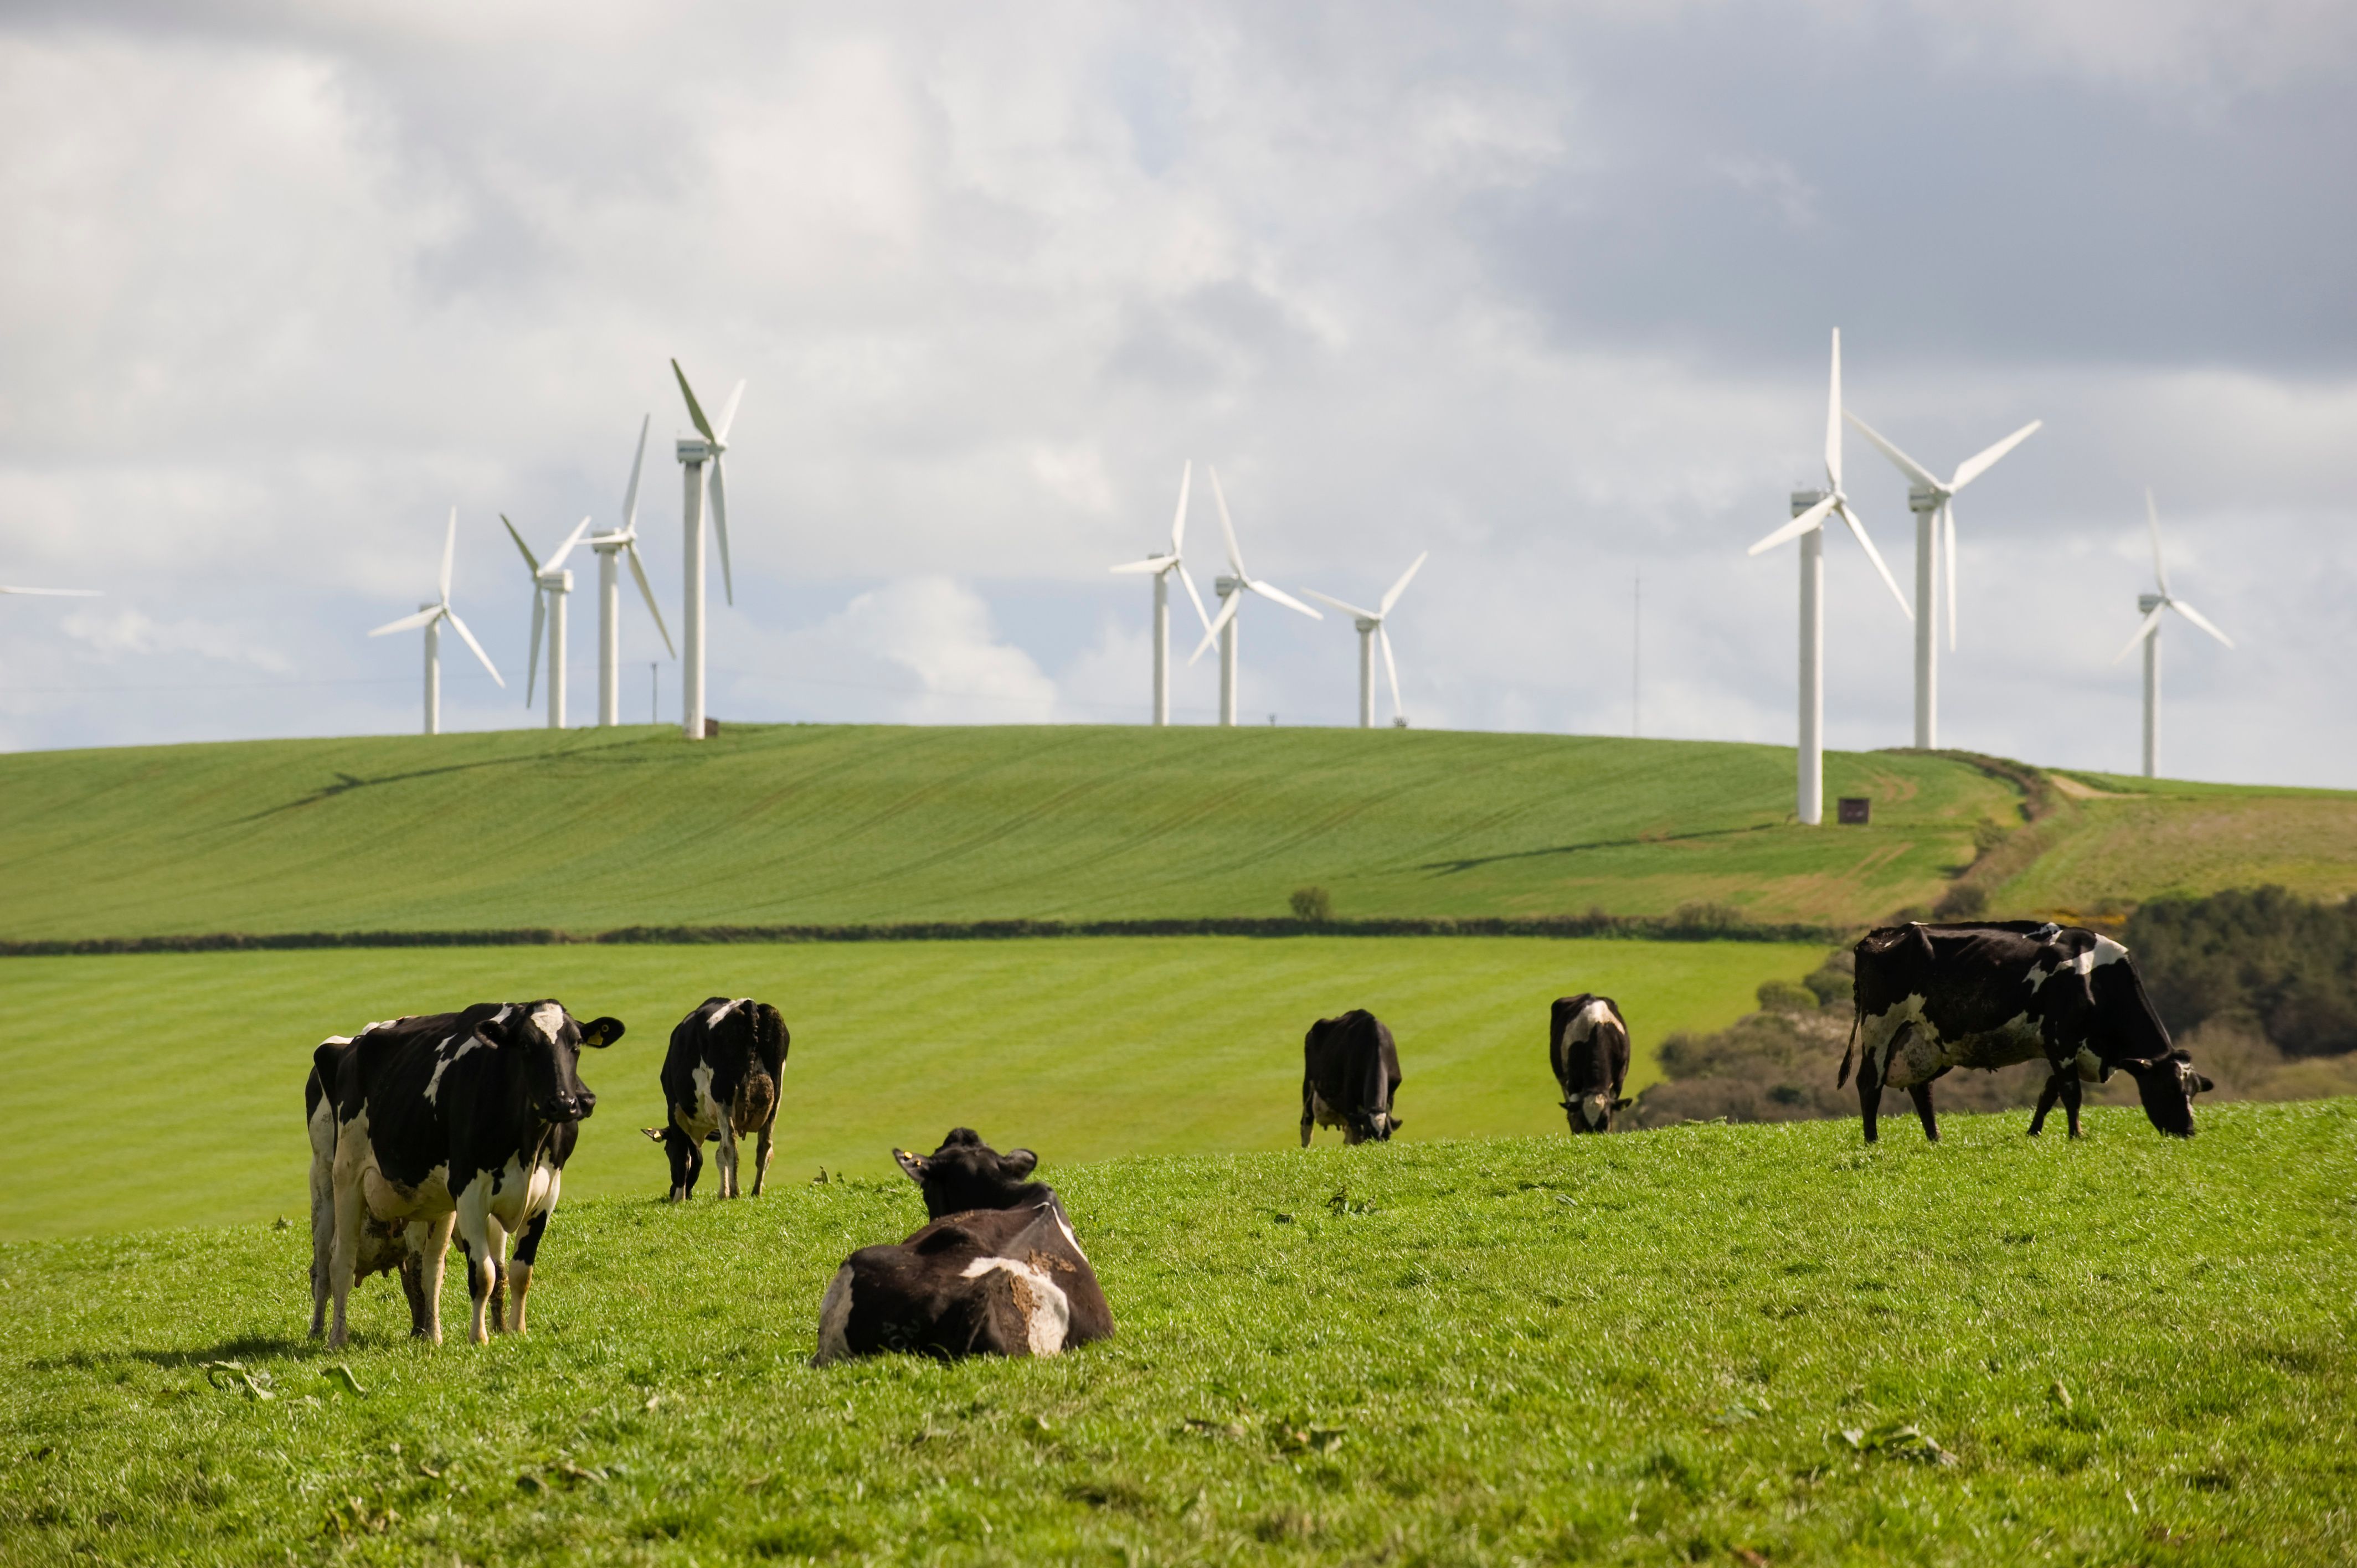 Shaping agriculture’s transition to a Net Zero future